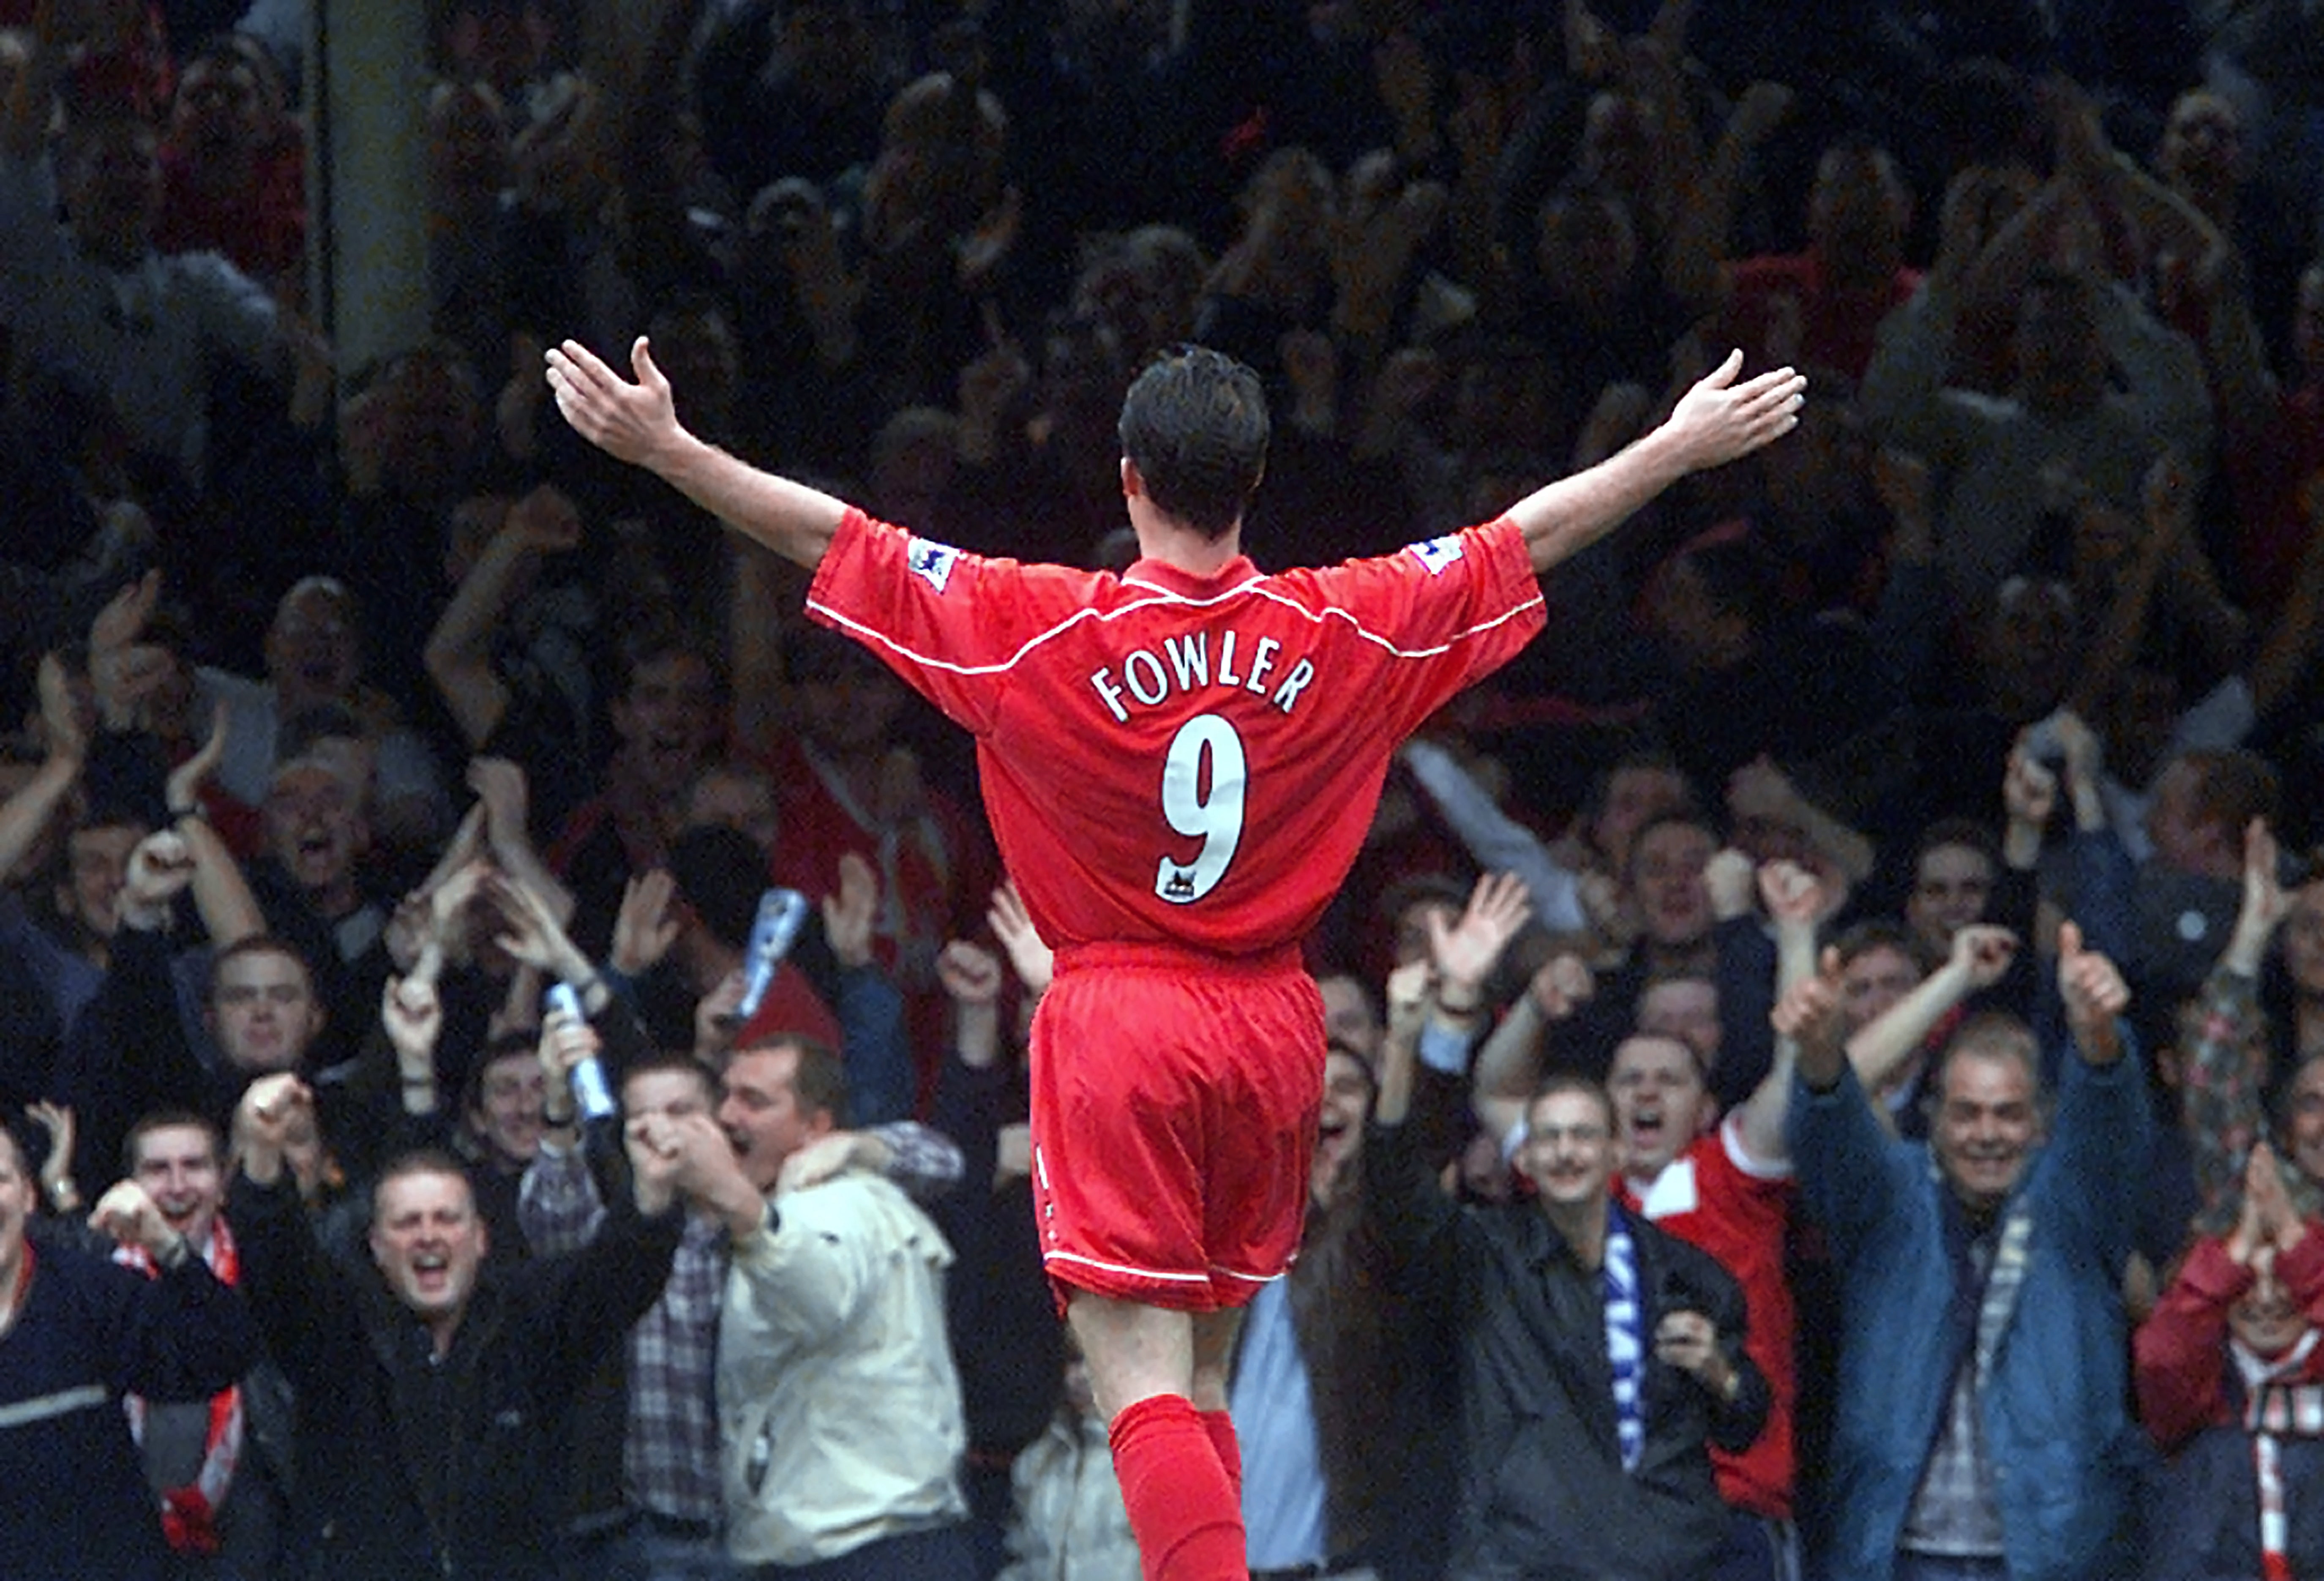 Robbie Fowler was adored at Anfield (David Davies/PA)